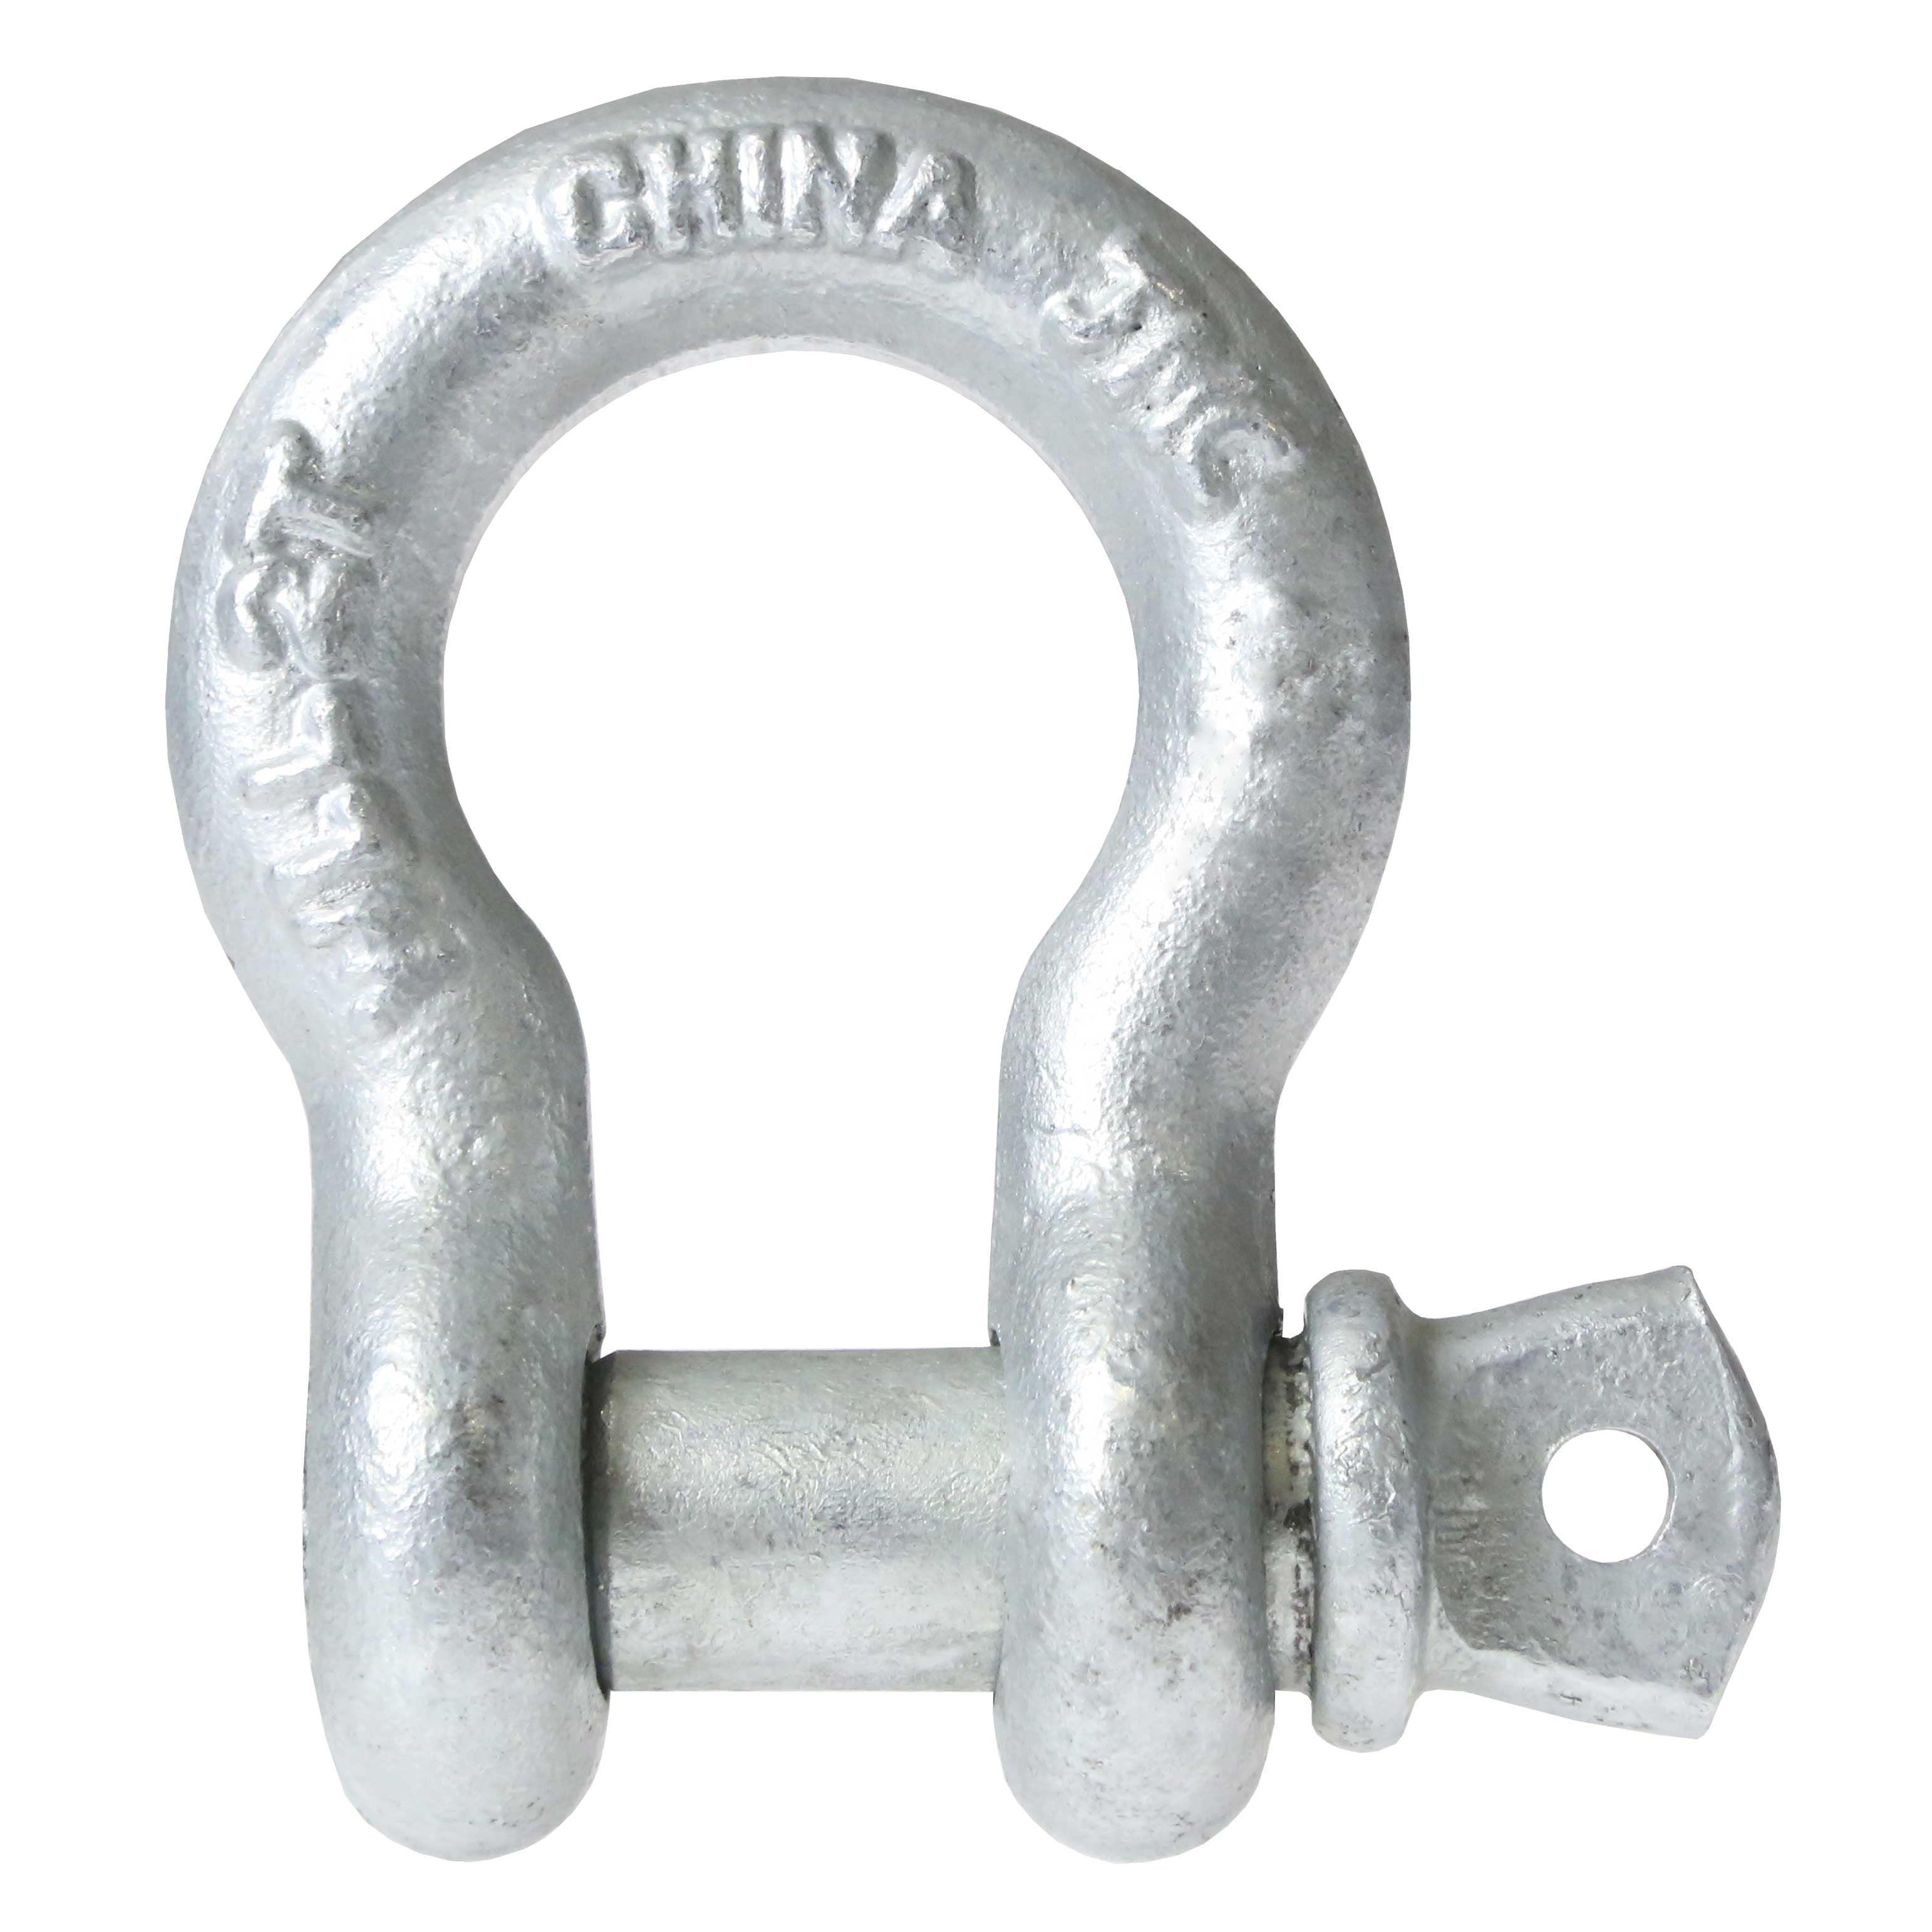 2 pack Hot Galvanized 7/16"" Shackle D Ring, 